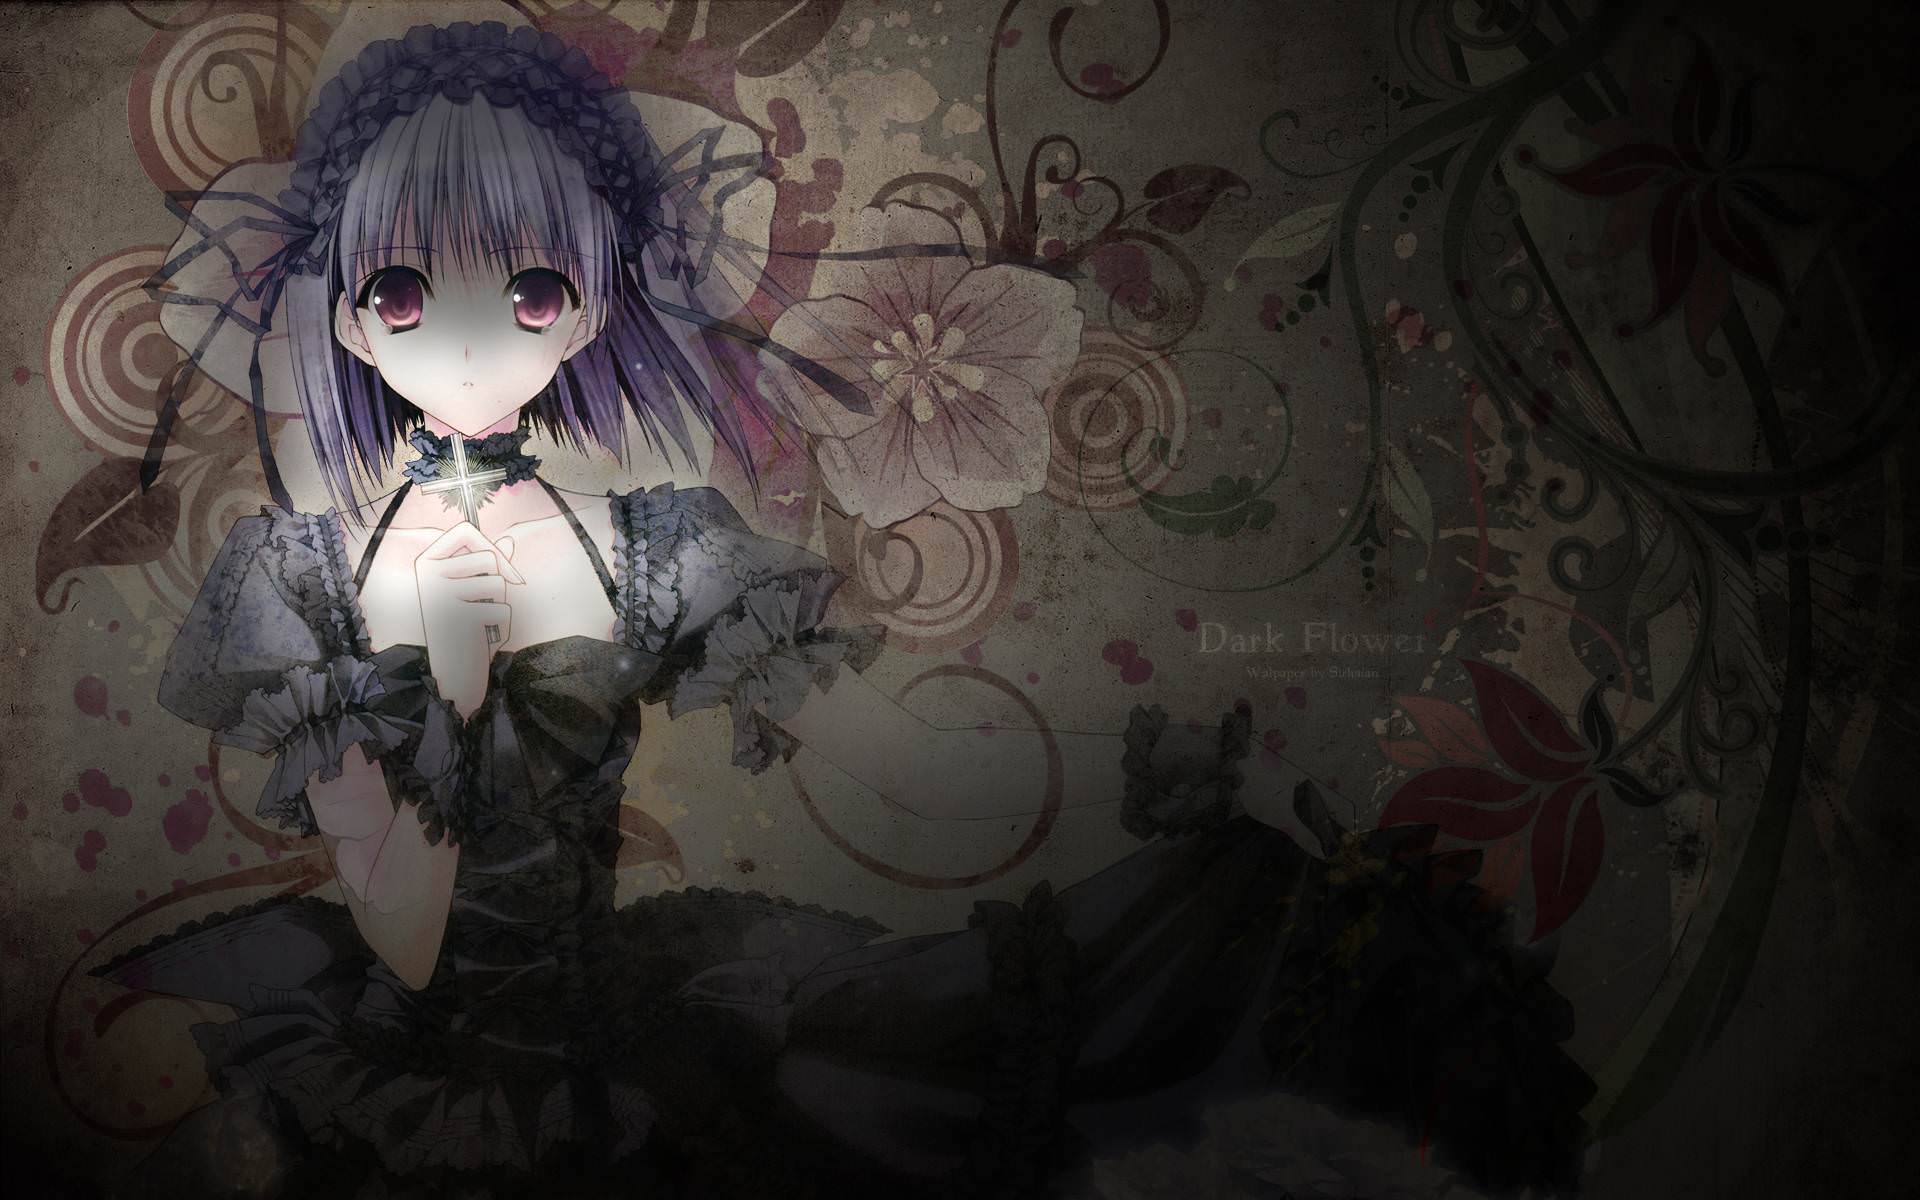 100 Gothic Anime Girl Stock Photos Pictures  RoyaltyFree Images  iStock